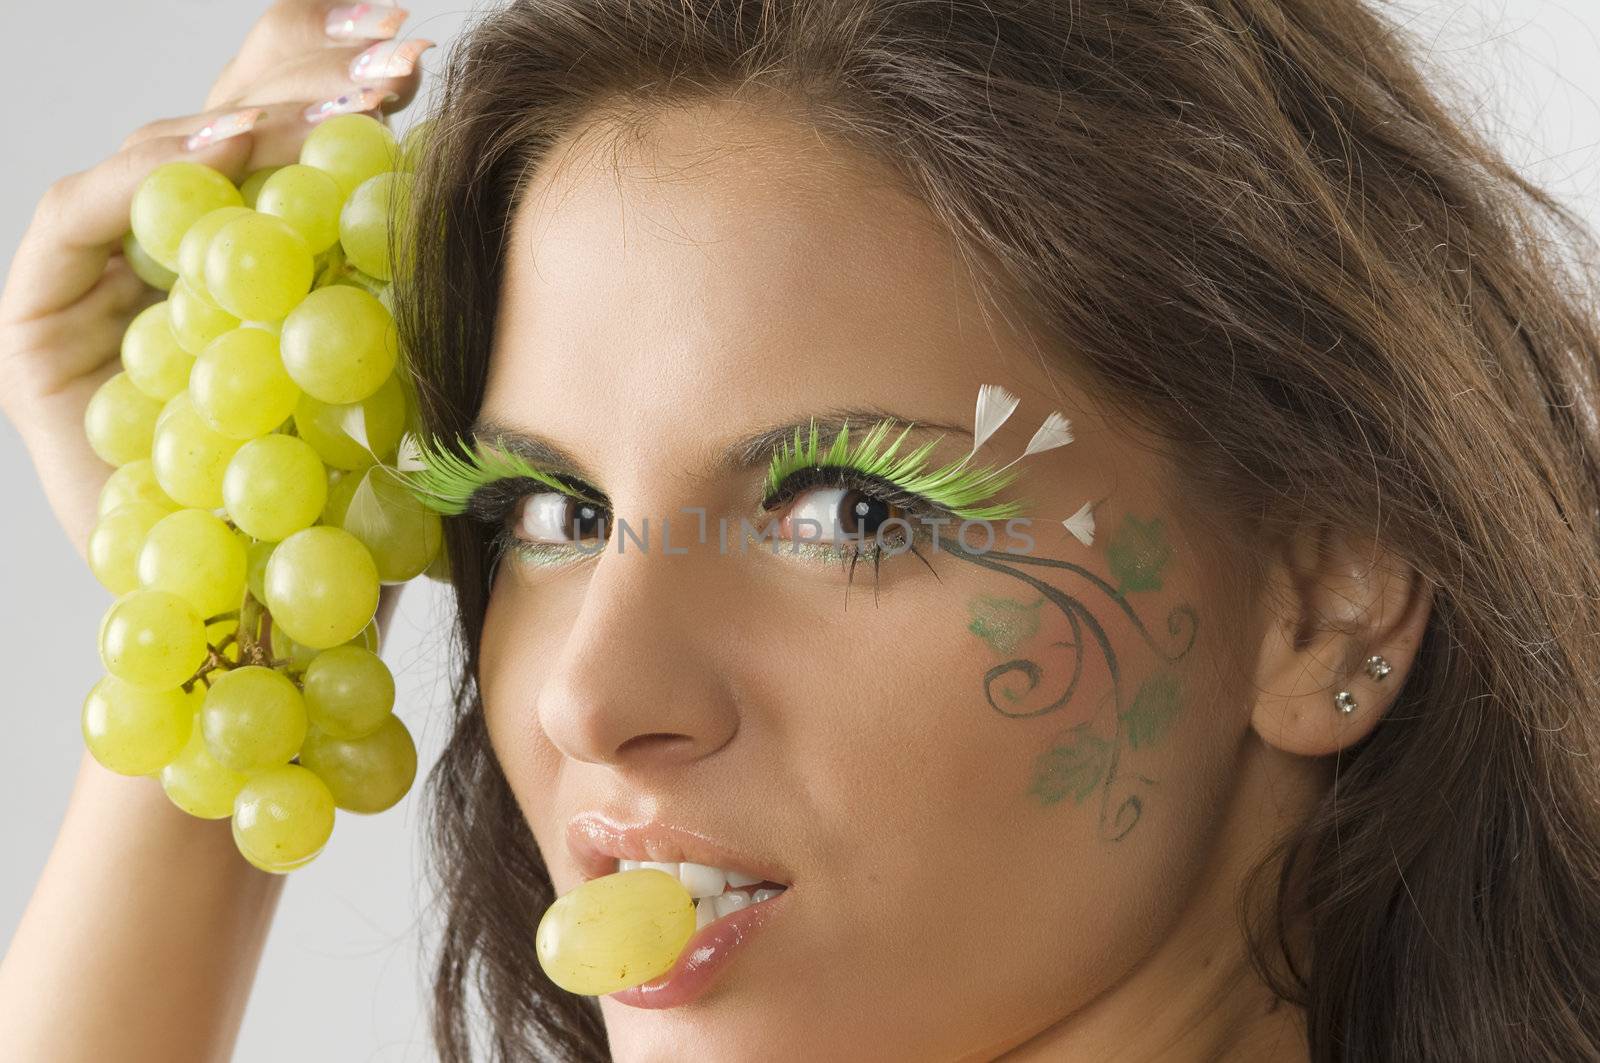 nice girl with a grape between the lips and her face painted with leaf